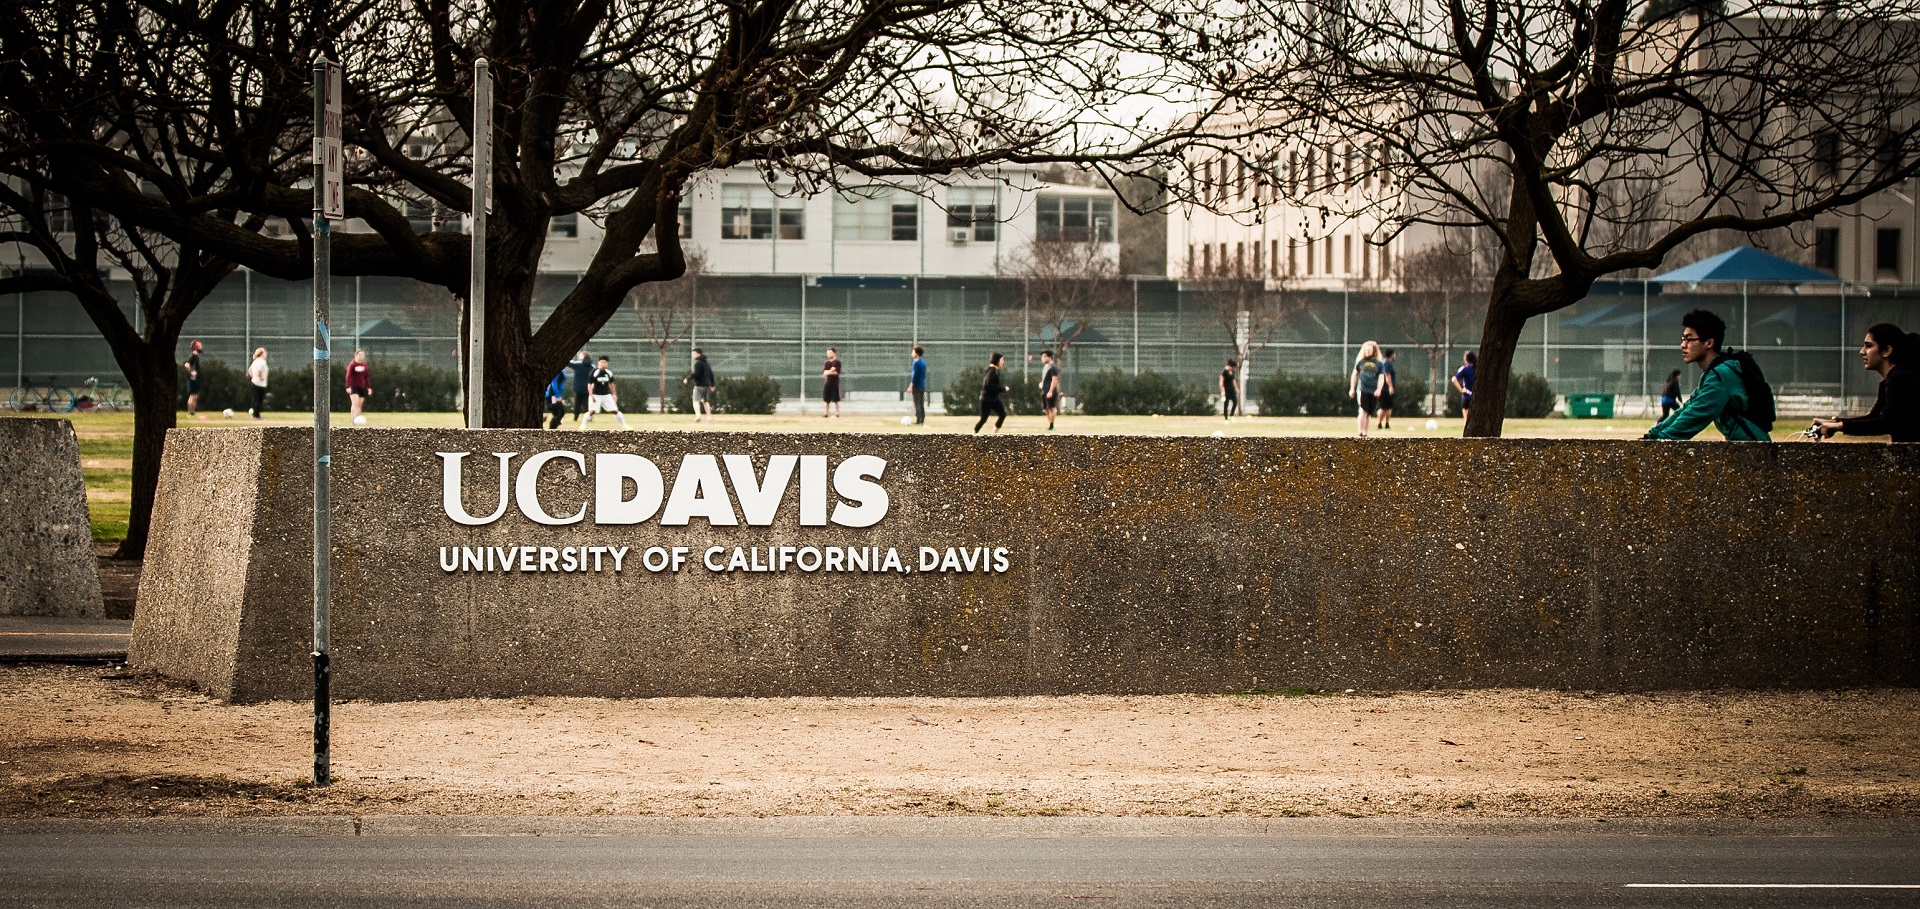 The UC Davis logo with a soccer game and bike riders in the background.